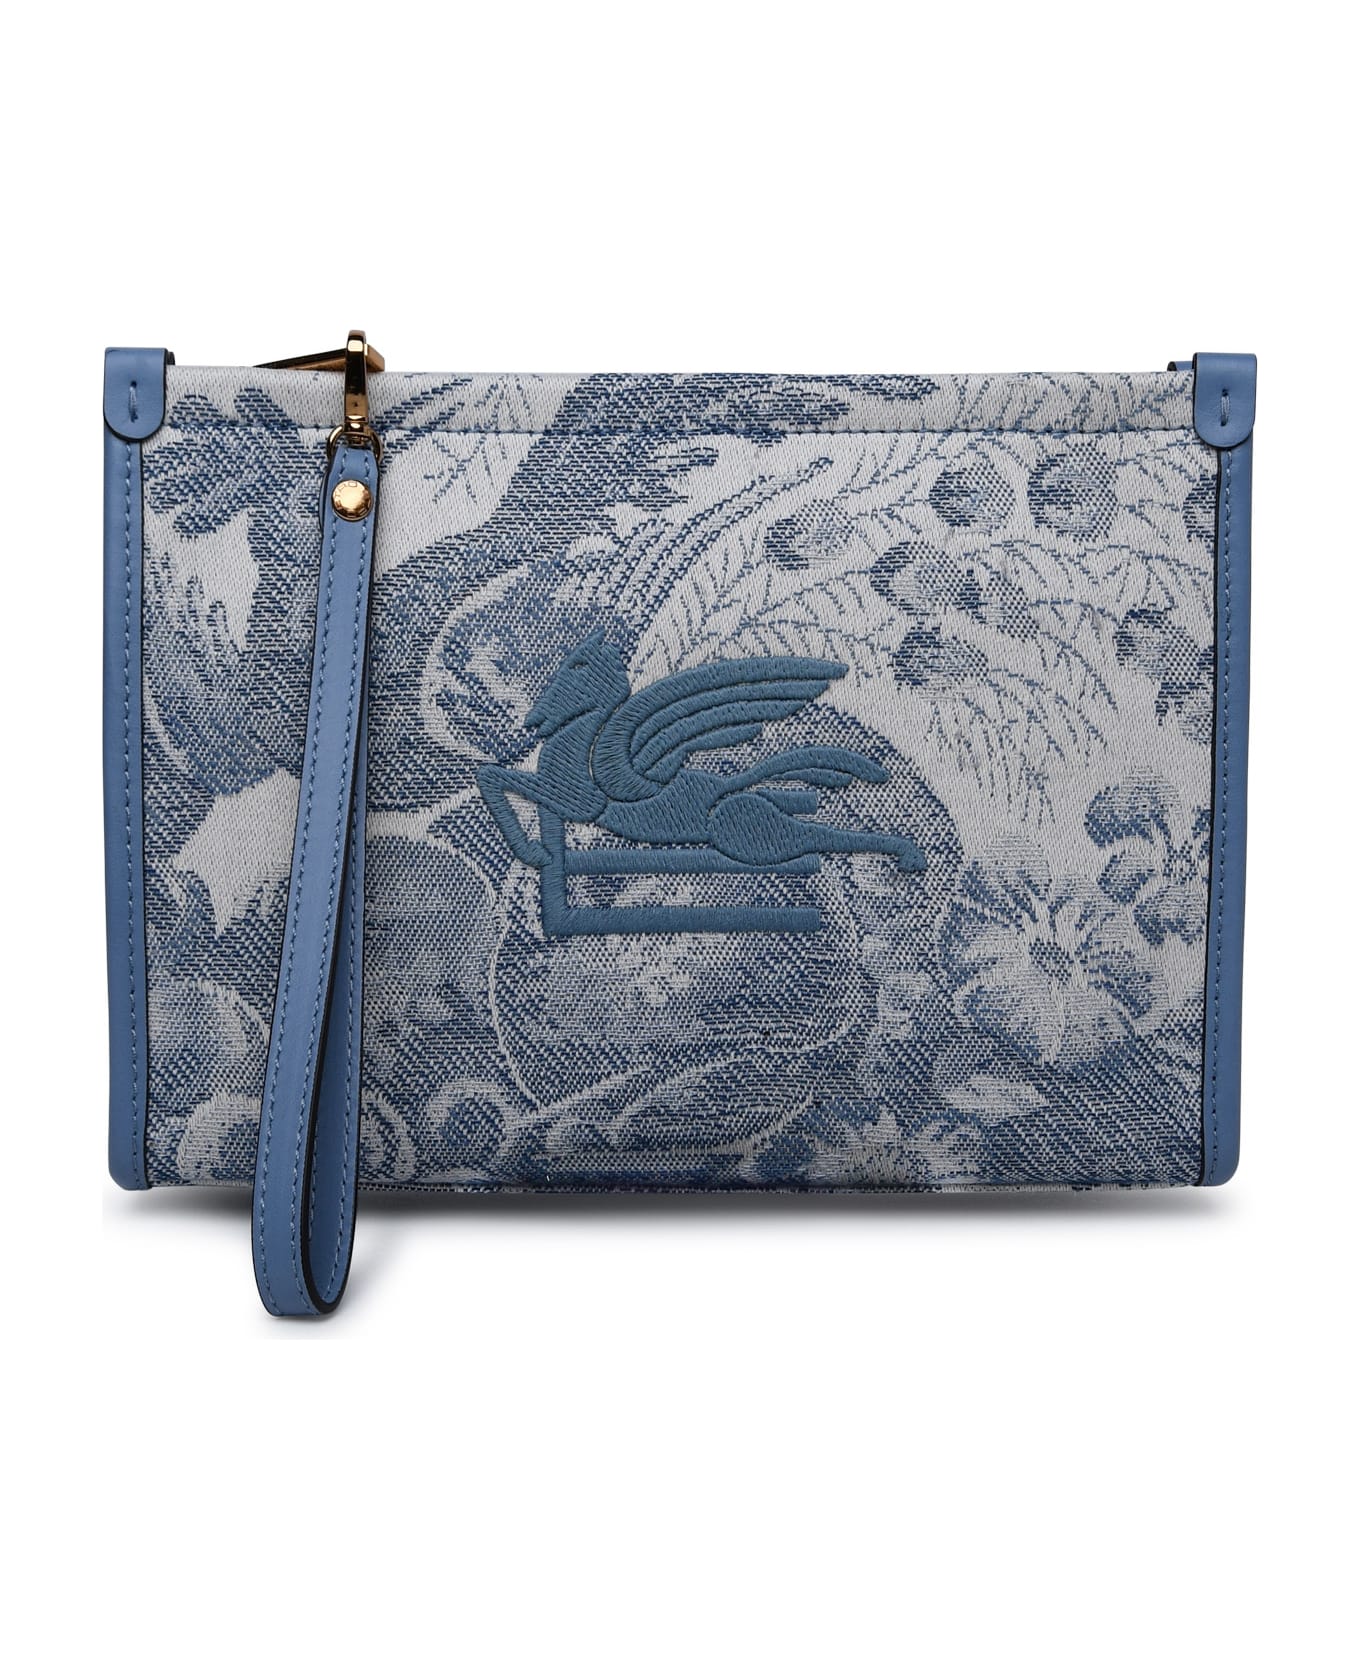 Etro Two-tone Fabric Clutch Bag - BLUE クラッチバッグ